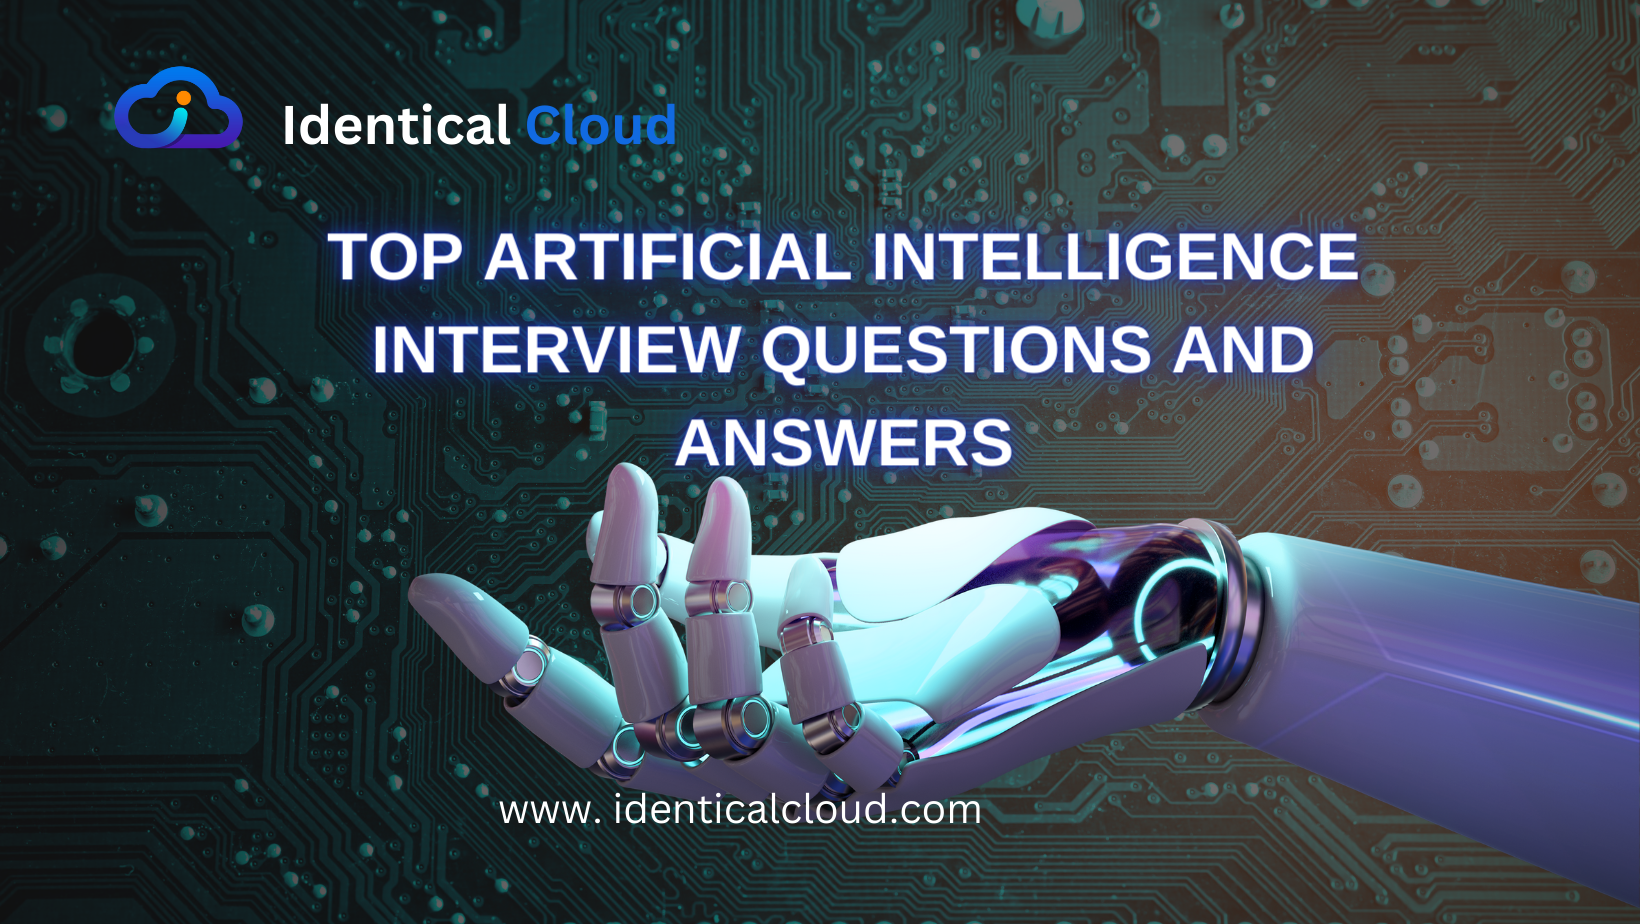 Top artificial intelligence Interview Questions and Answers - identicalcloud.com